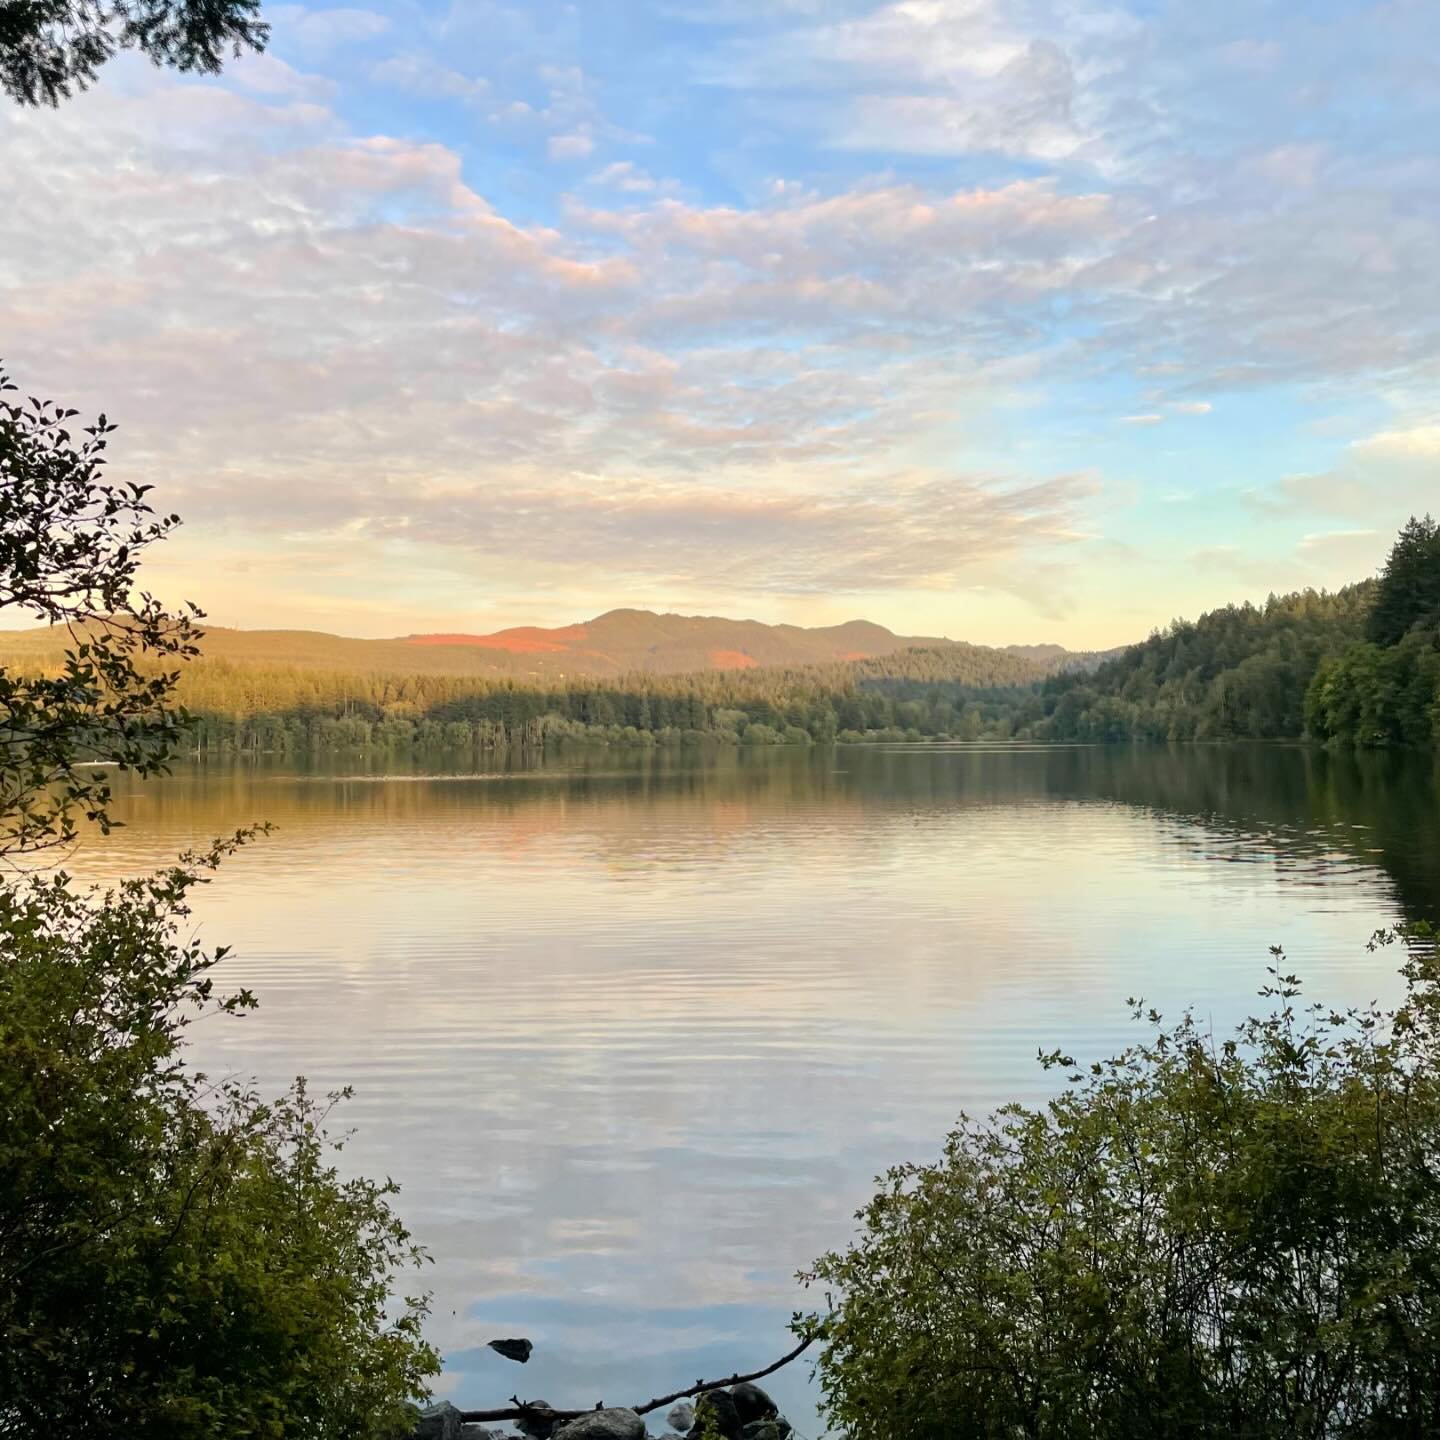 Lake Padden Park is the perfect place for a good walk as the trail around this beautiful lake is 2.6 miles long with half in the sun and half in the forested canopy. There are two docks (one on each end) from which you can fish or just sit on a bench